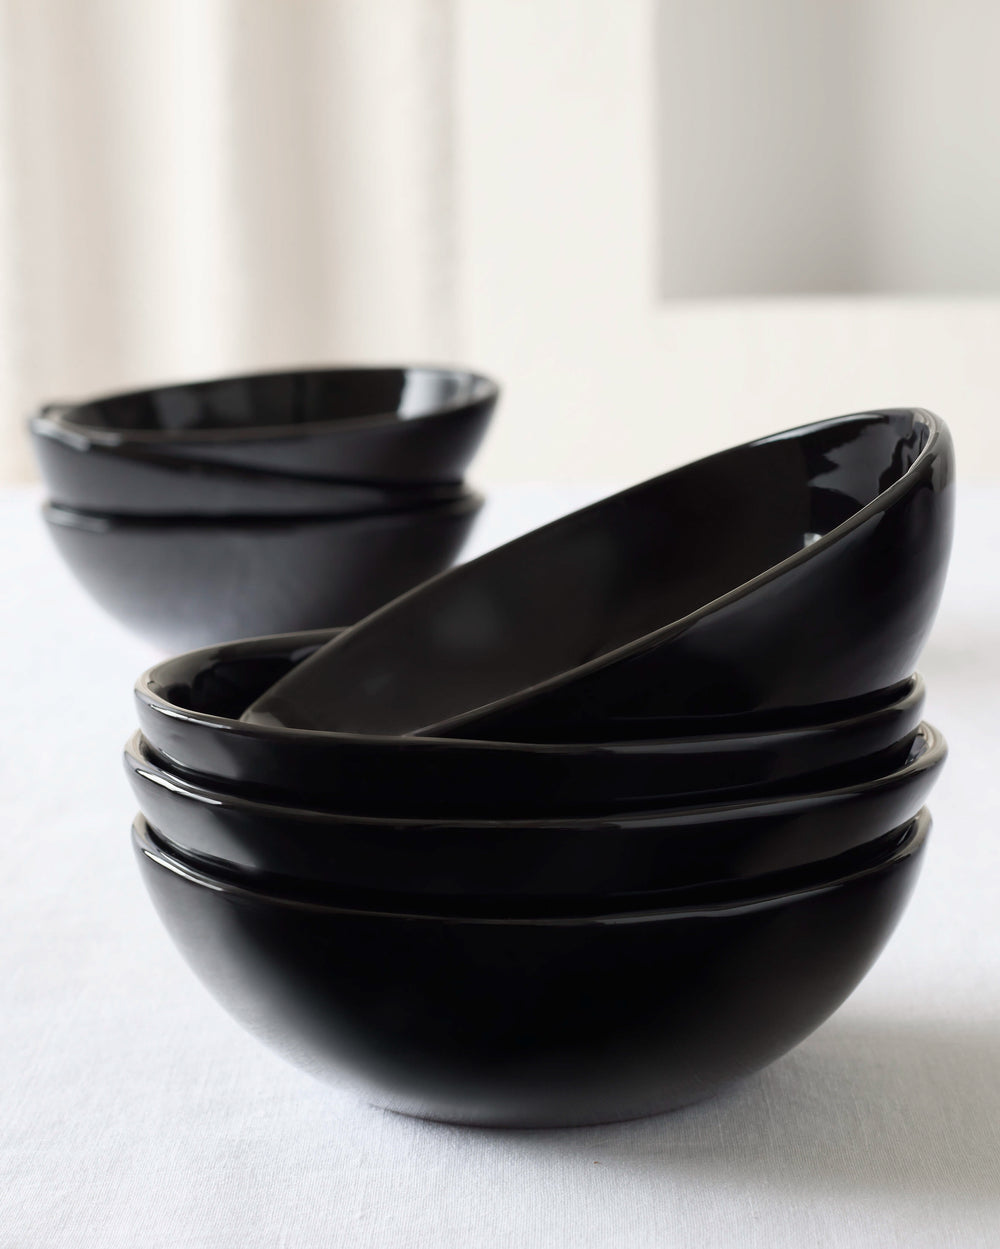 Black Riad Soup Bowls stacked on white table, part of the Morocco Ceramic Collection by Fairkind.